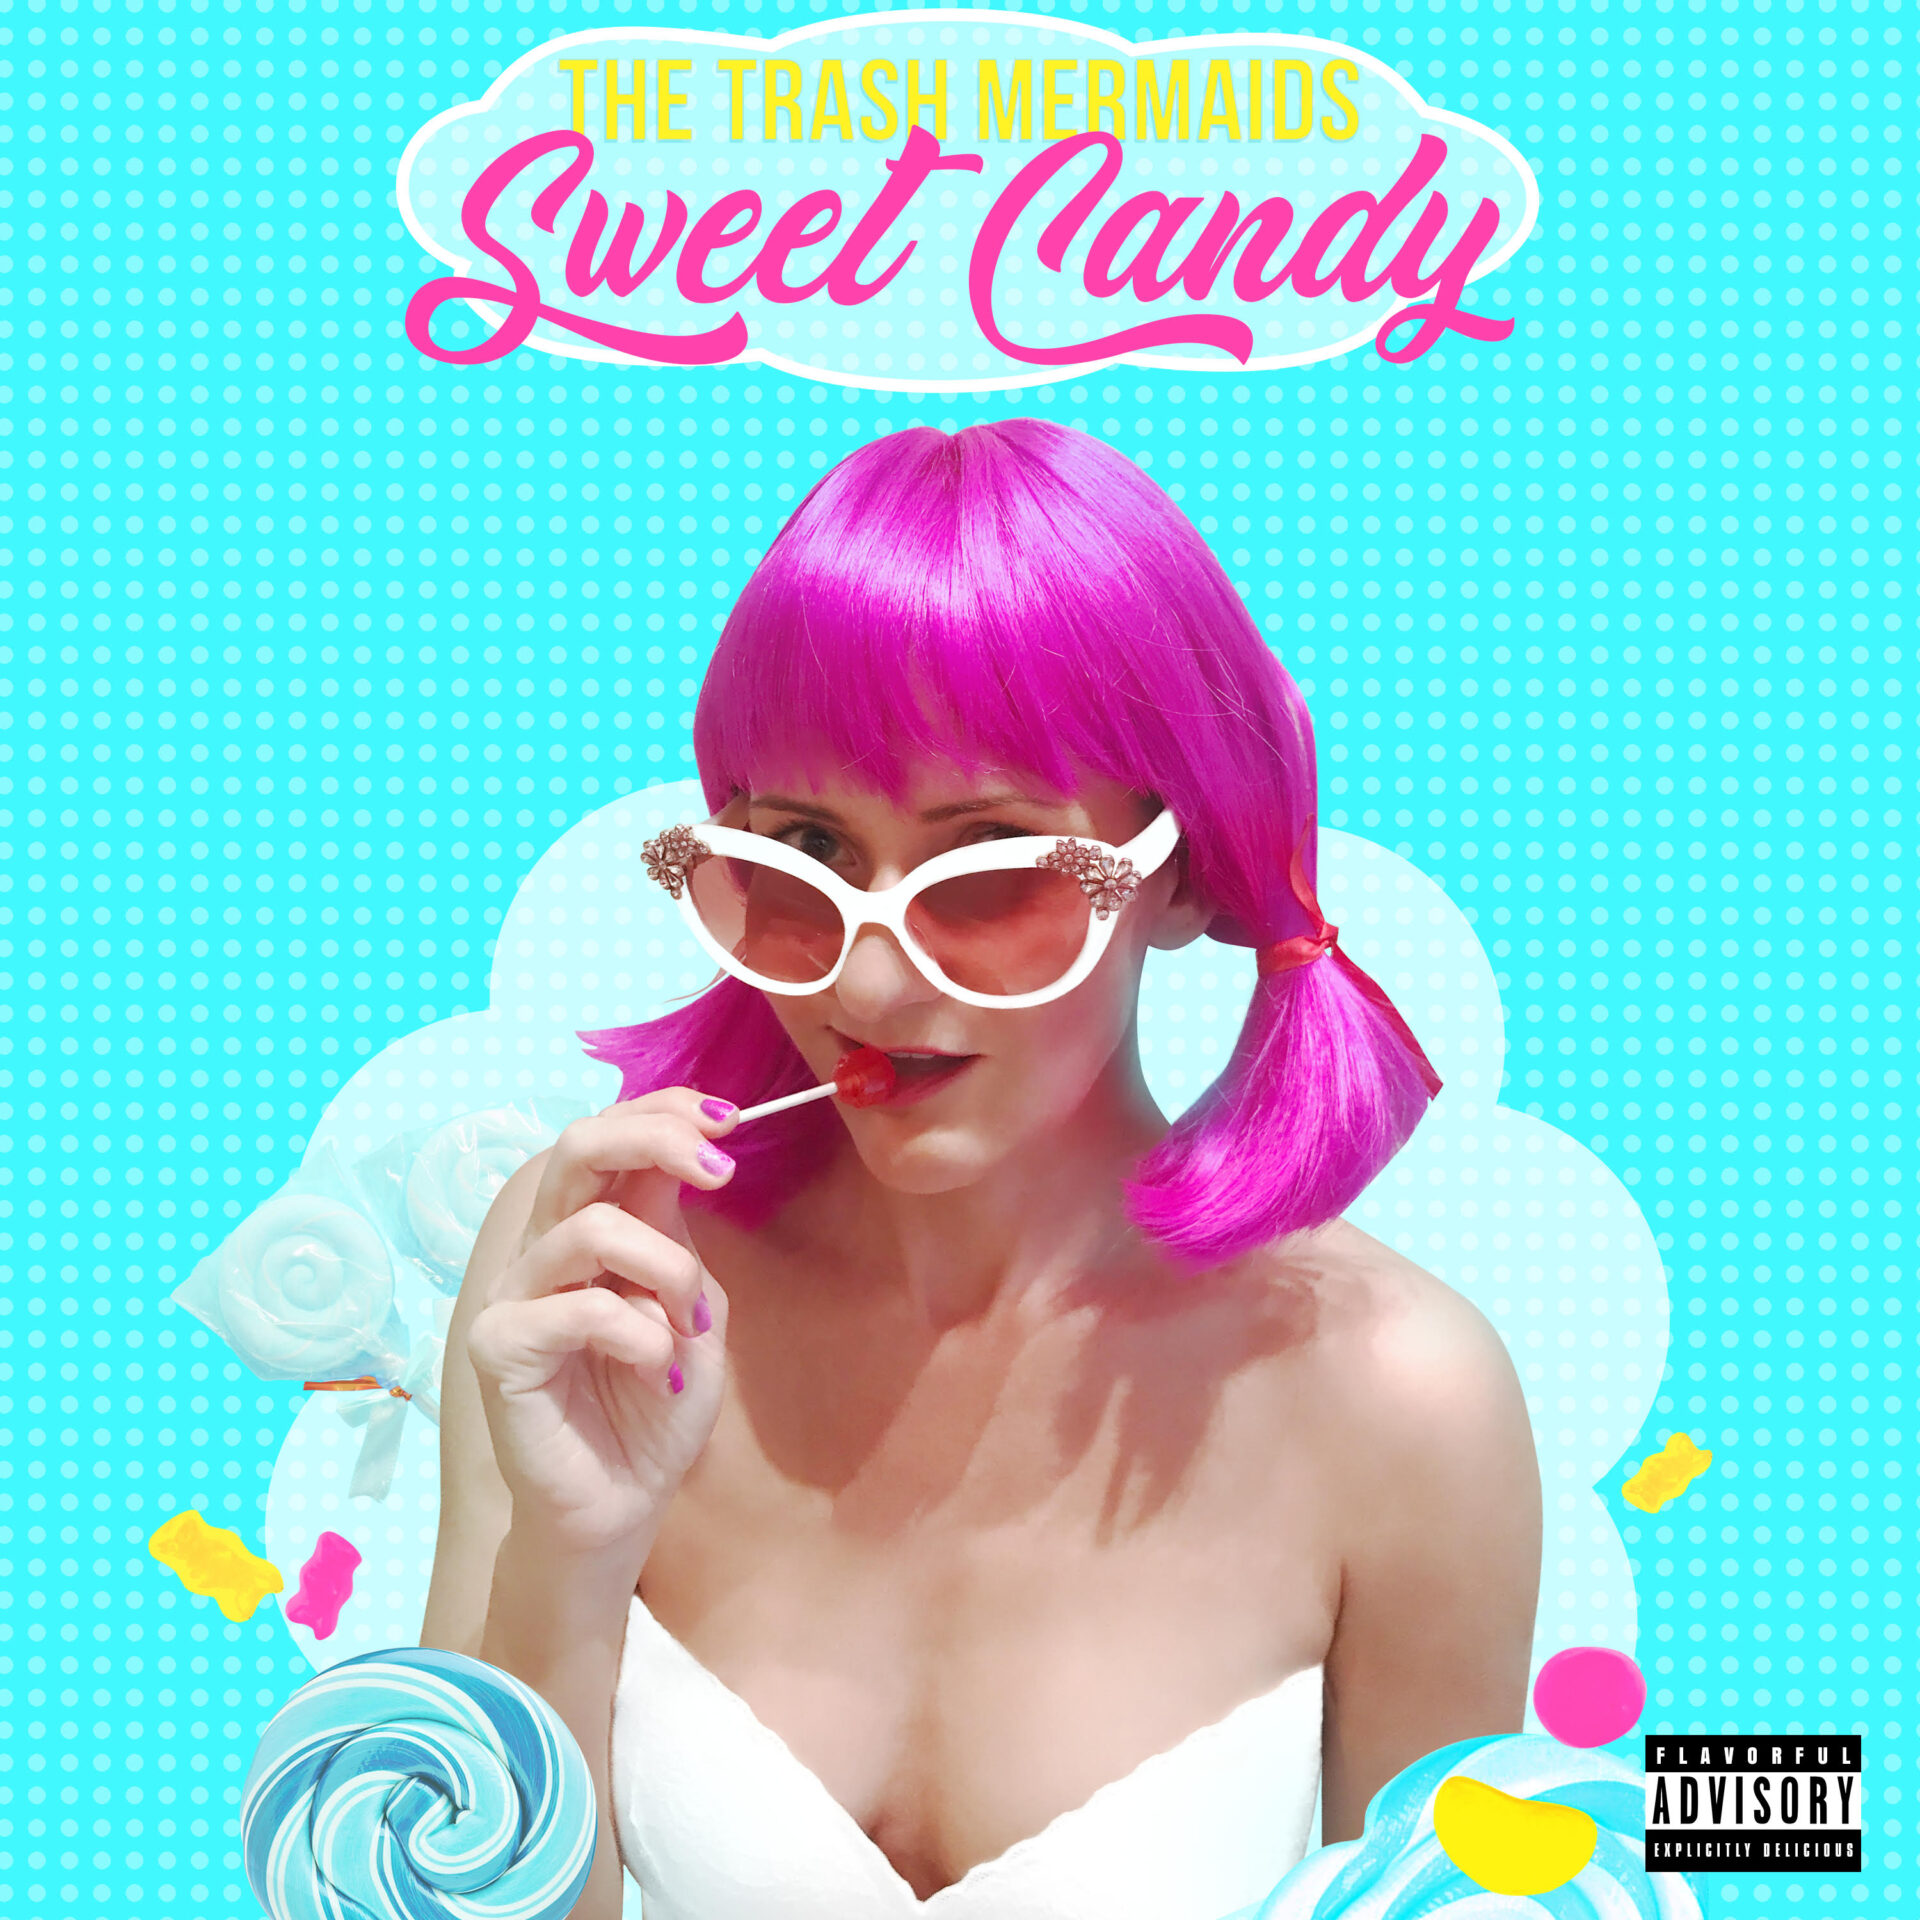 PREMIERE: The Trash Mermaids deliver a sonic sugar rush on “Sweet Candy”